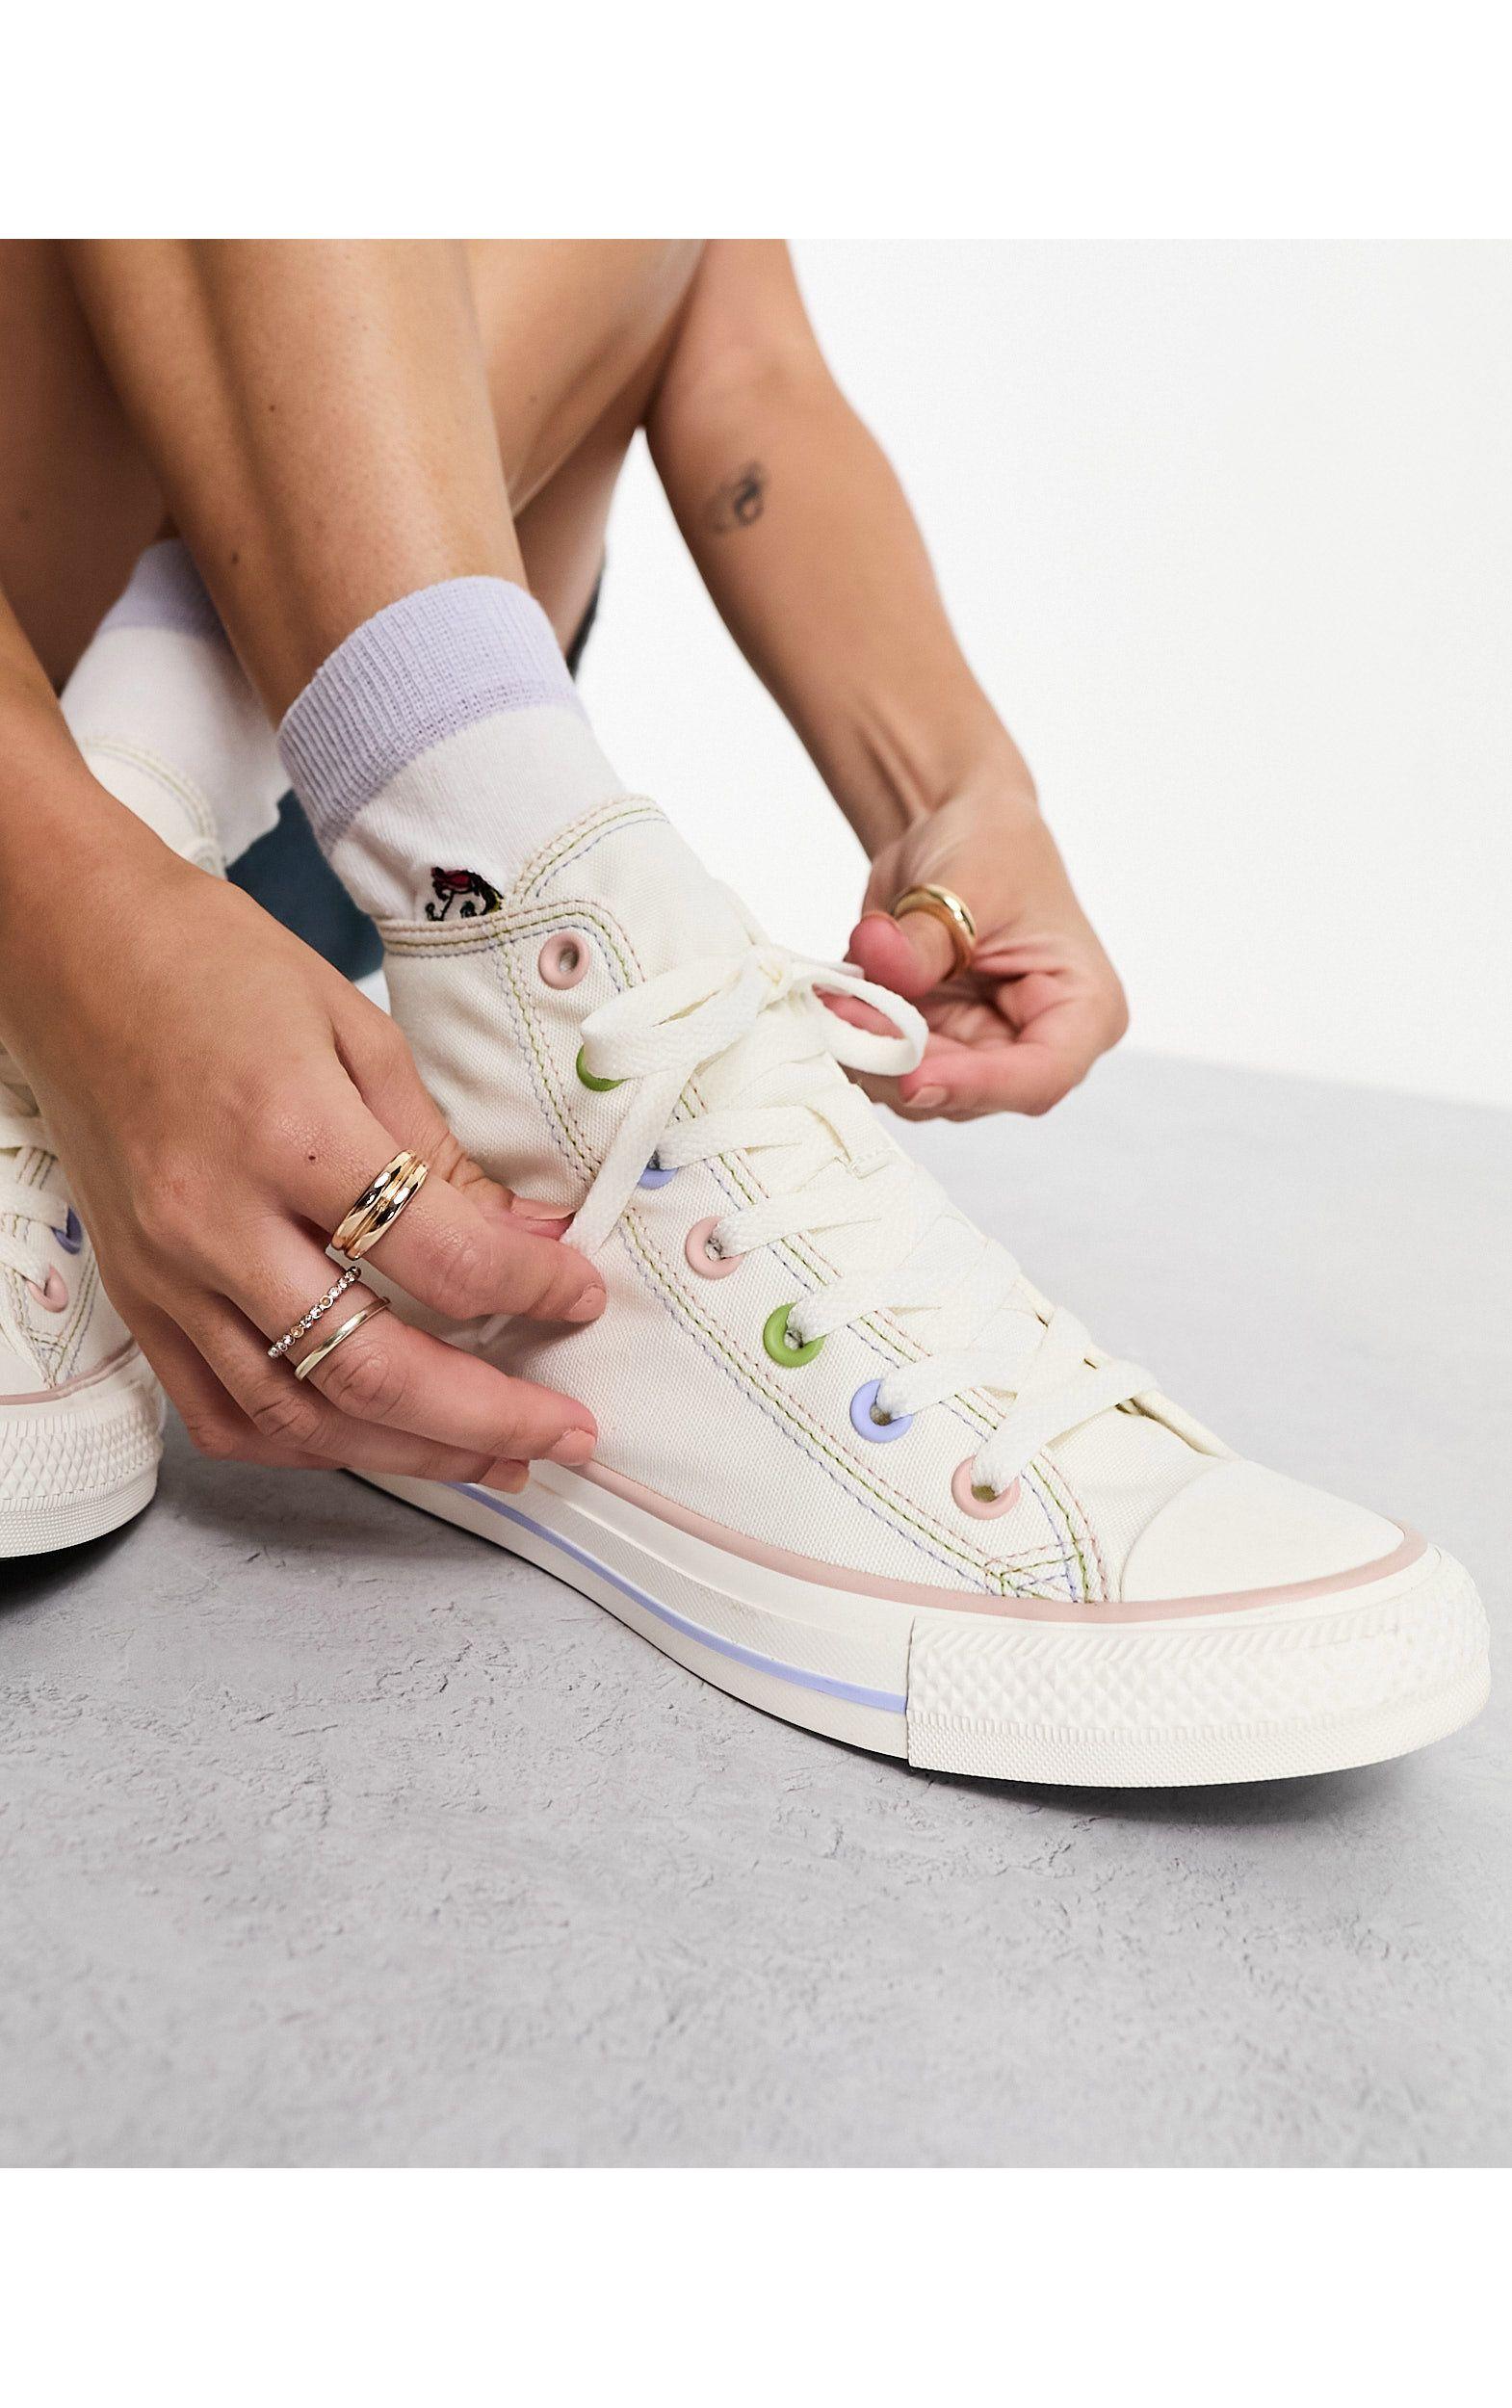 Converse Chuck Taylor All Star Hi Mixed Material Sneakers in White | Lyst